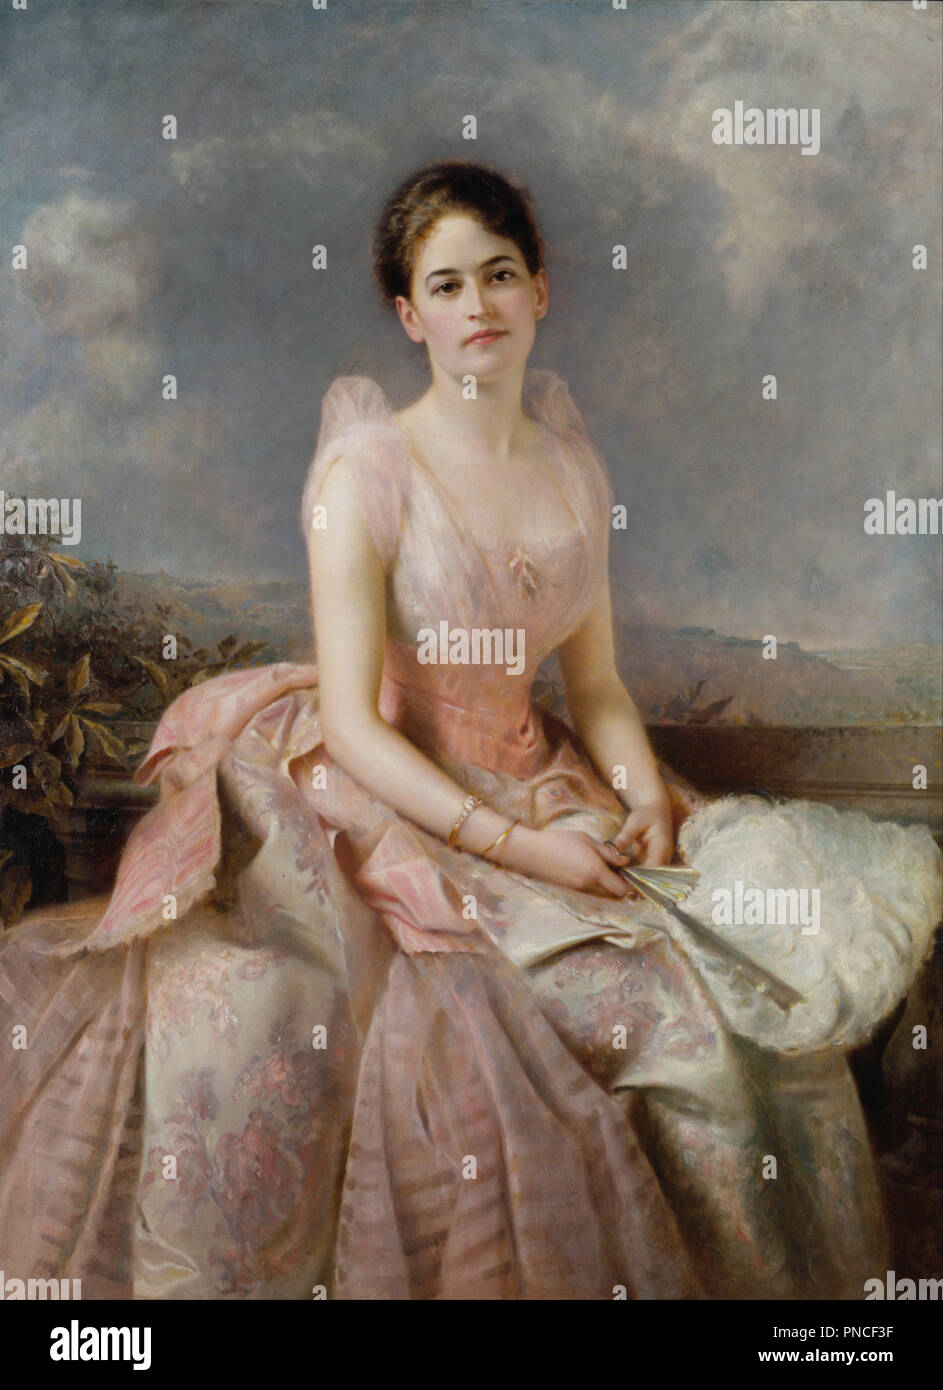 Juliette Gordon Low. Date/Period: 1887. Painting. Oil on canvas. Height: 1,334 mm (52.51 in); Width: 965 mm (37.99 in). Author: EDWARD HUGHES. Stock Photo